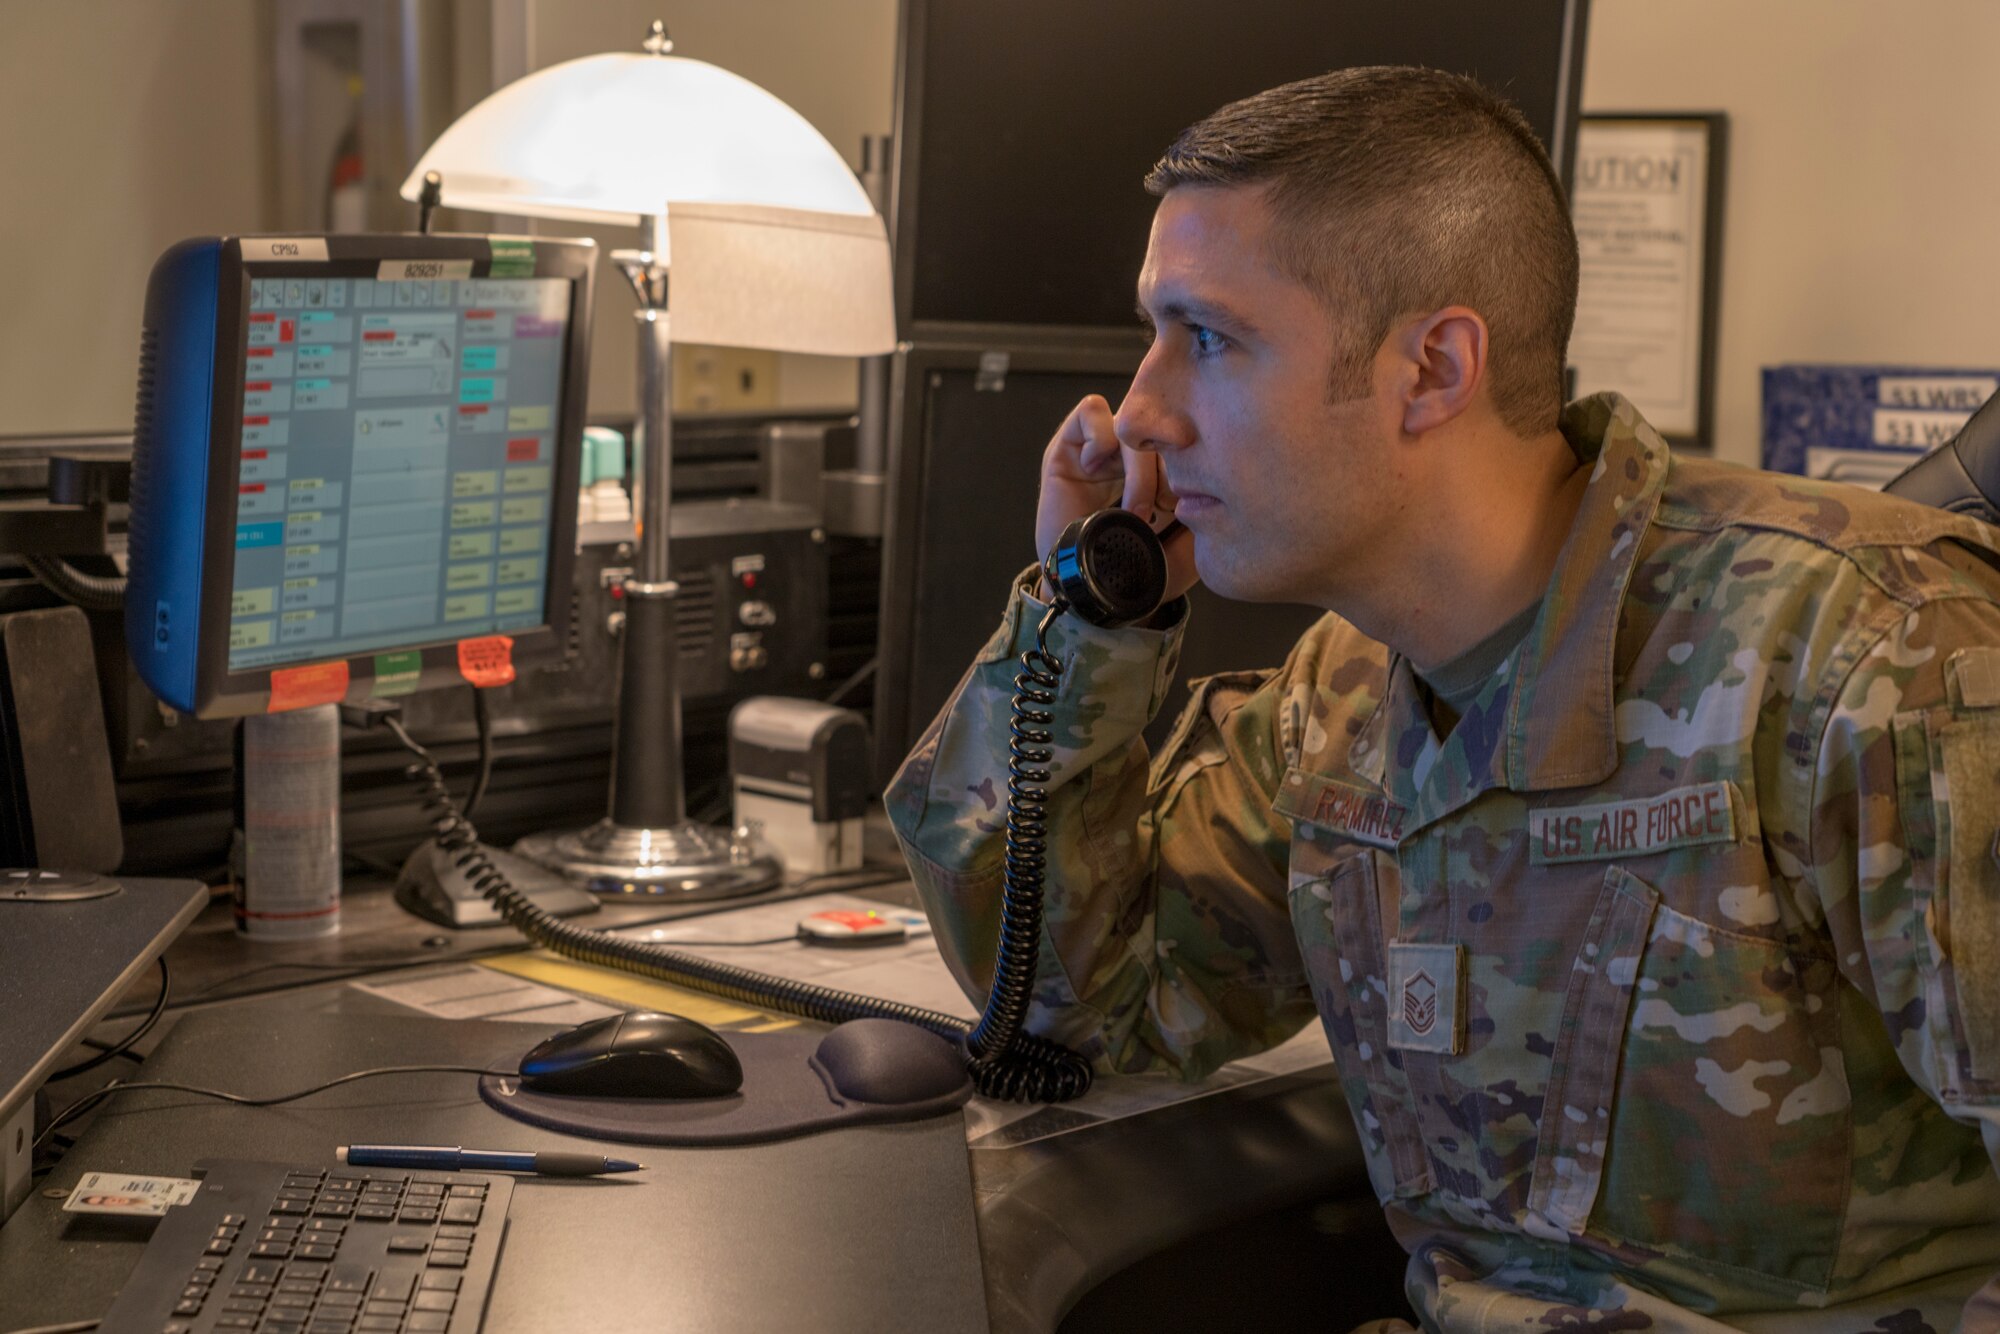 Master Sgt. Carlos Ramirez, 403rd Wing Command Post readiness reporting manager, answers questions about current base operations over the phone at Keesler Air Force Base, Miss., April 11, 2021. The command post manages and performs a multitude of command and control operations that, depending on the call they receive, can vary from minor issues to major incidents. (U.S. Air Force photo by 2nd Lt. Christopher Carranza)